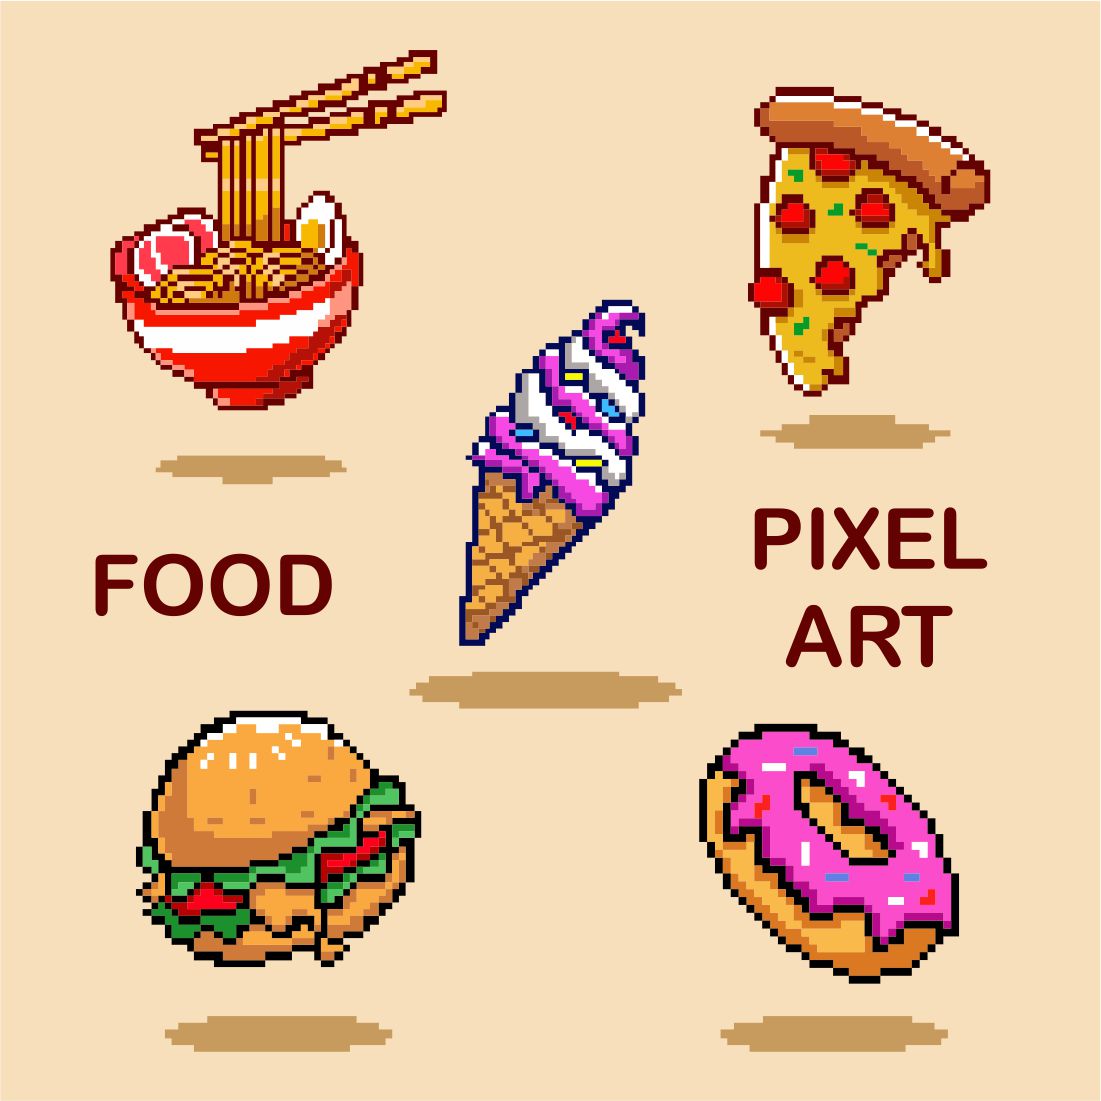 Food Pixel Art - Only $ 11 cover image.